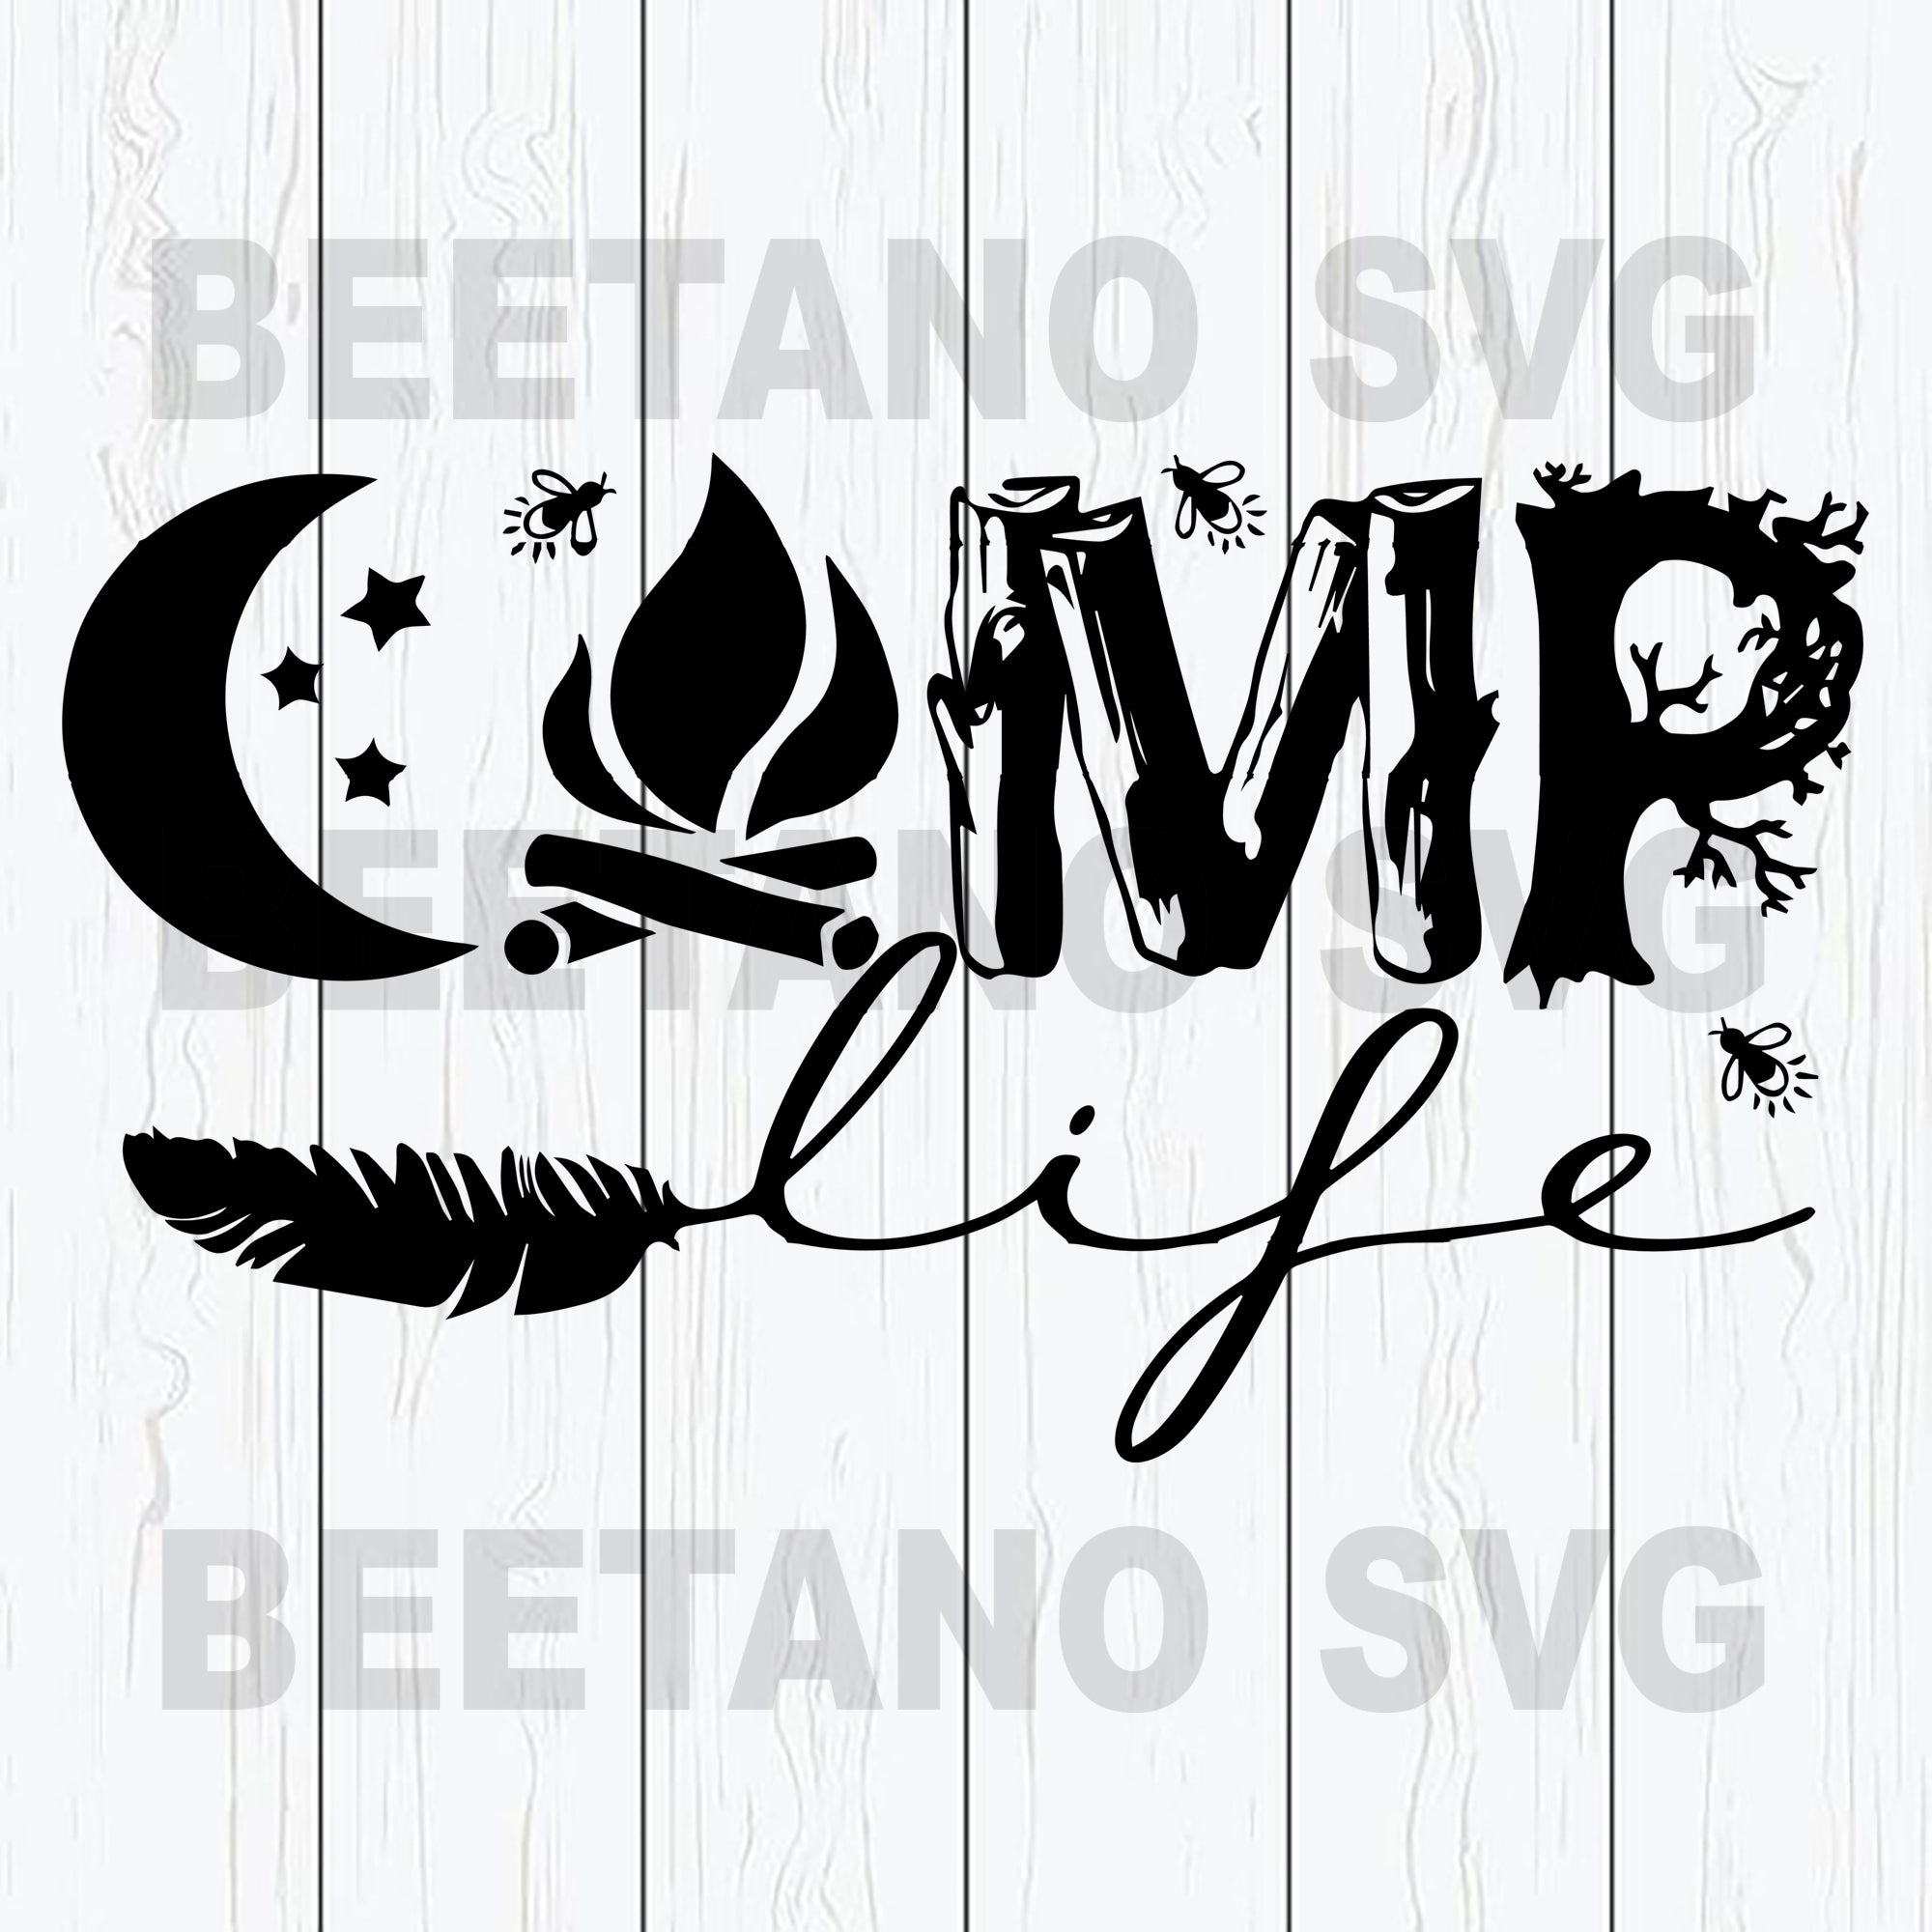 Download Camping Life High Quality Svg Cut Files Best For Unique Craft